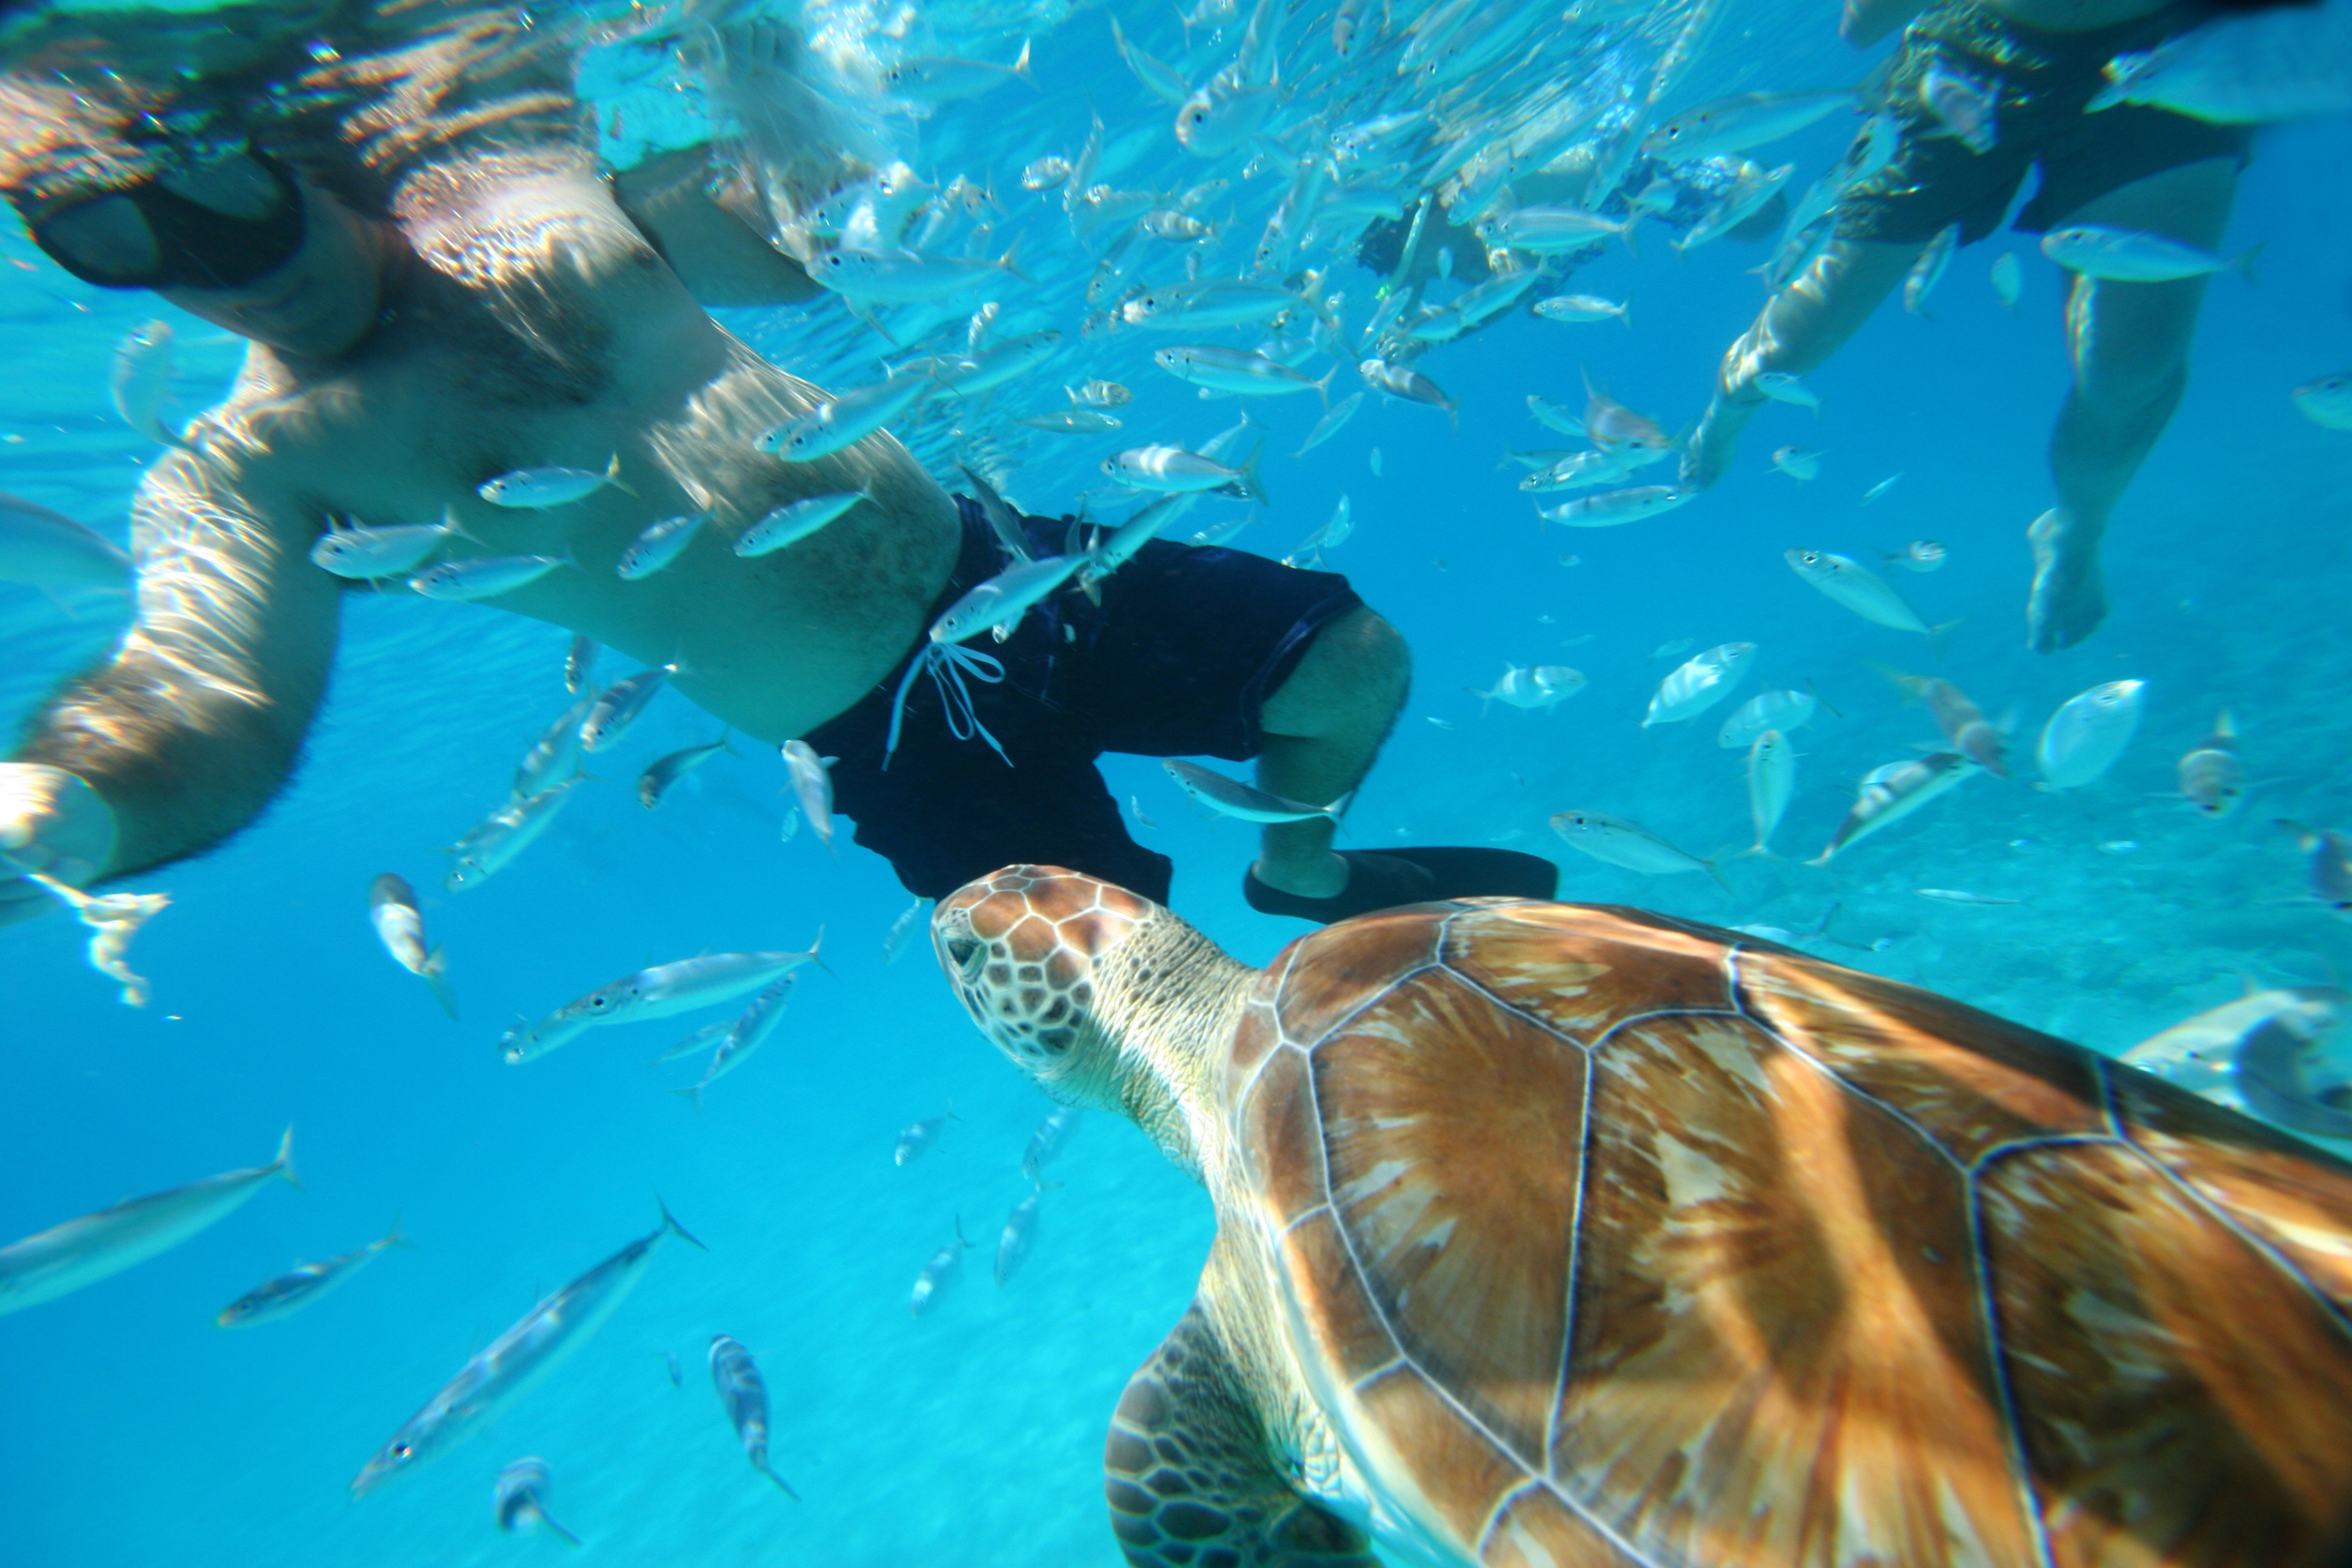 Island Routes Caribbean Adventure Tours takes you swimming with the turtles in ...